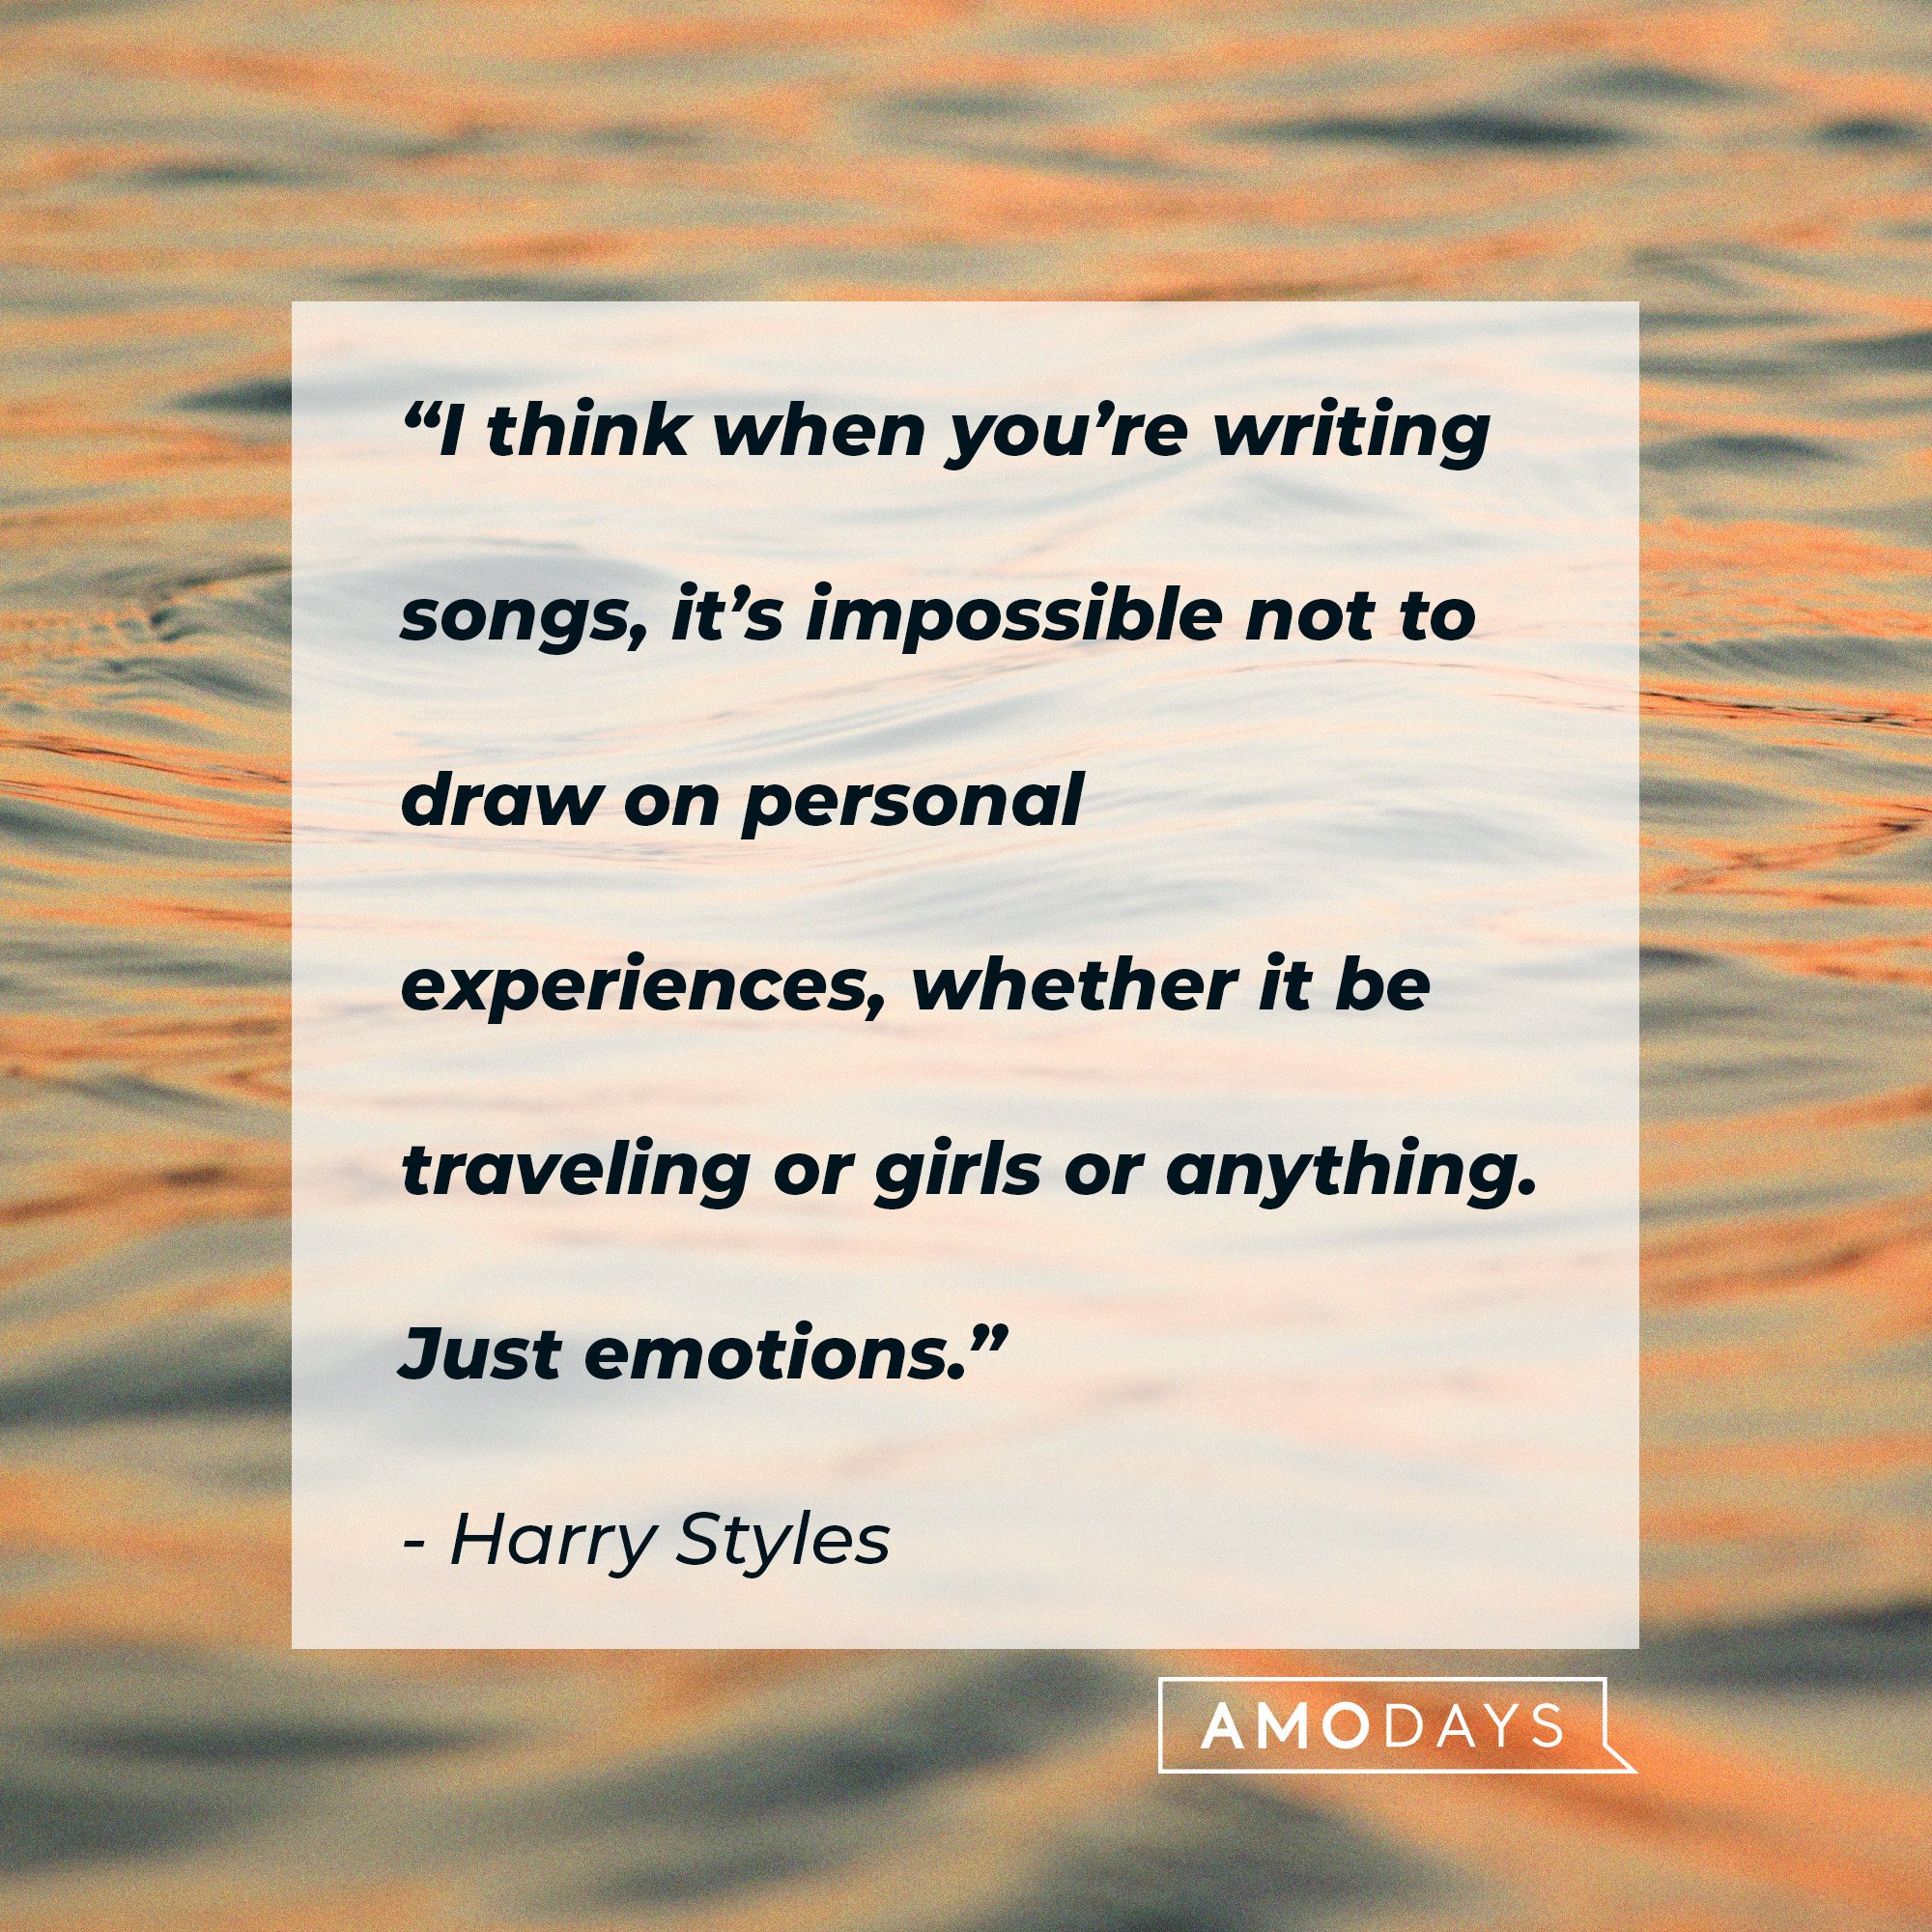 Harry Style's quote: “I think when you're writing songs, it's impossible to not draw on personal experiences, whether it be traveling or girls, or anything.” | Source: Amodays